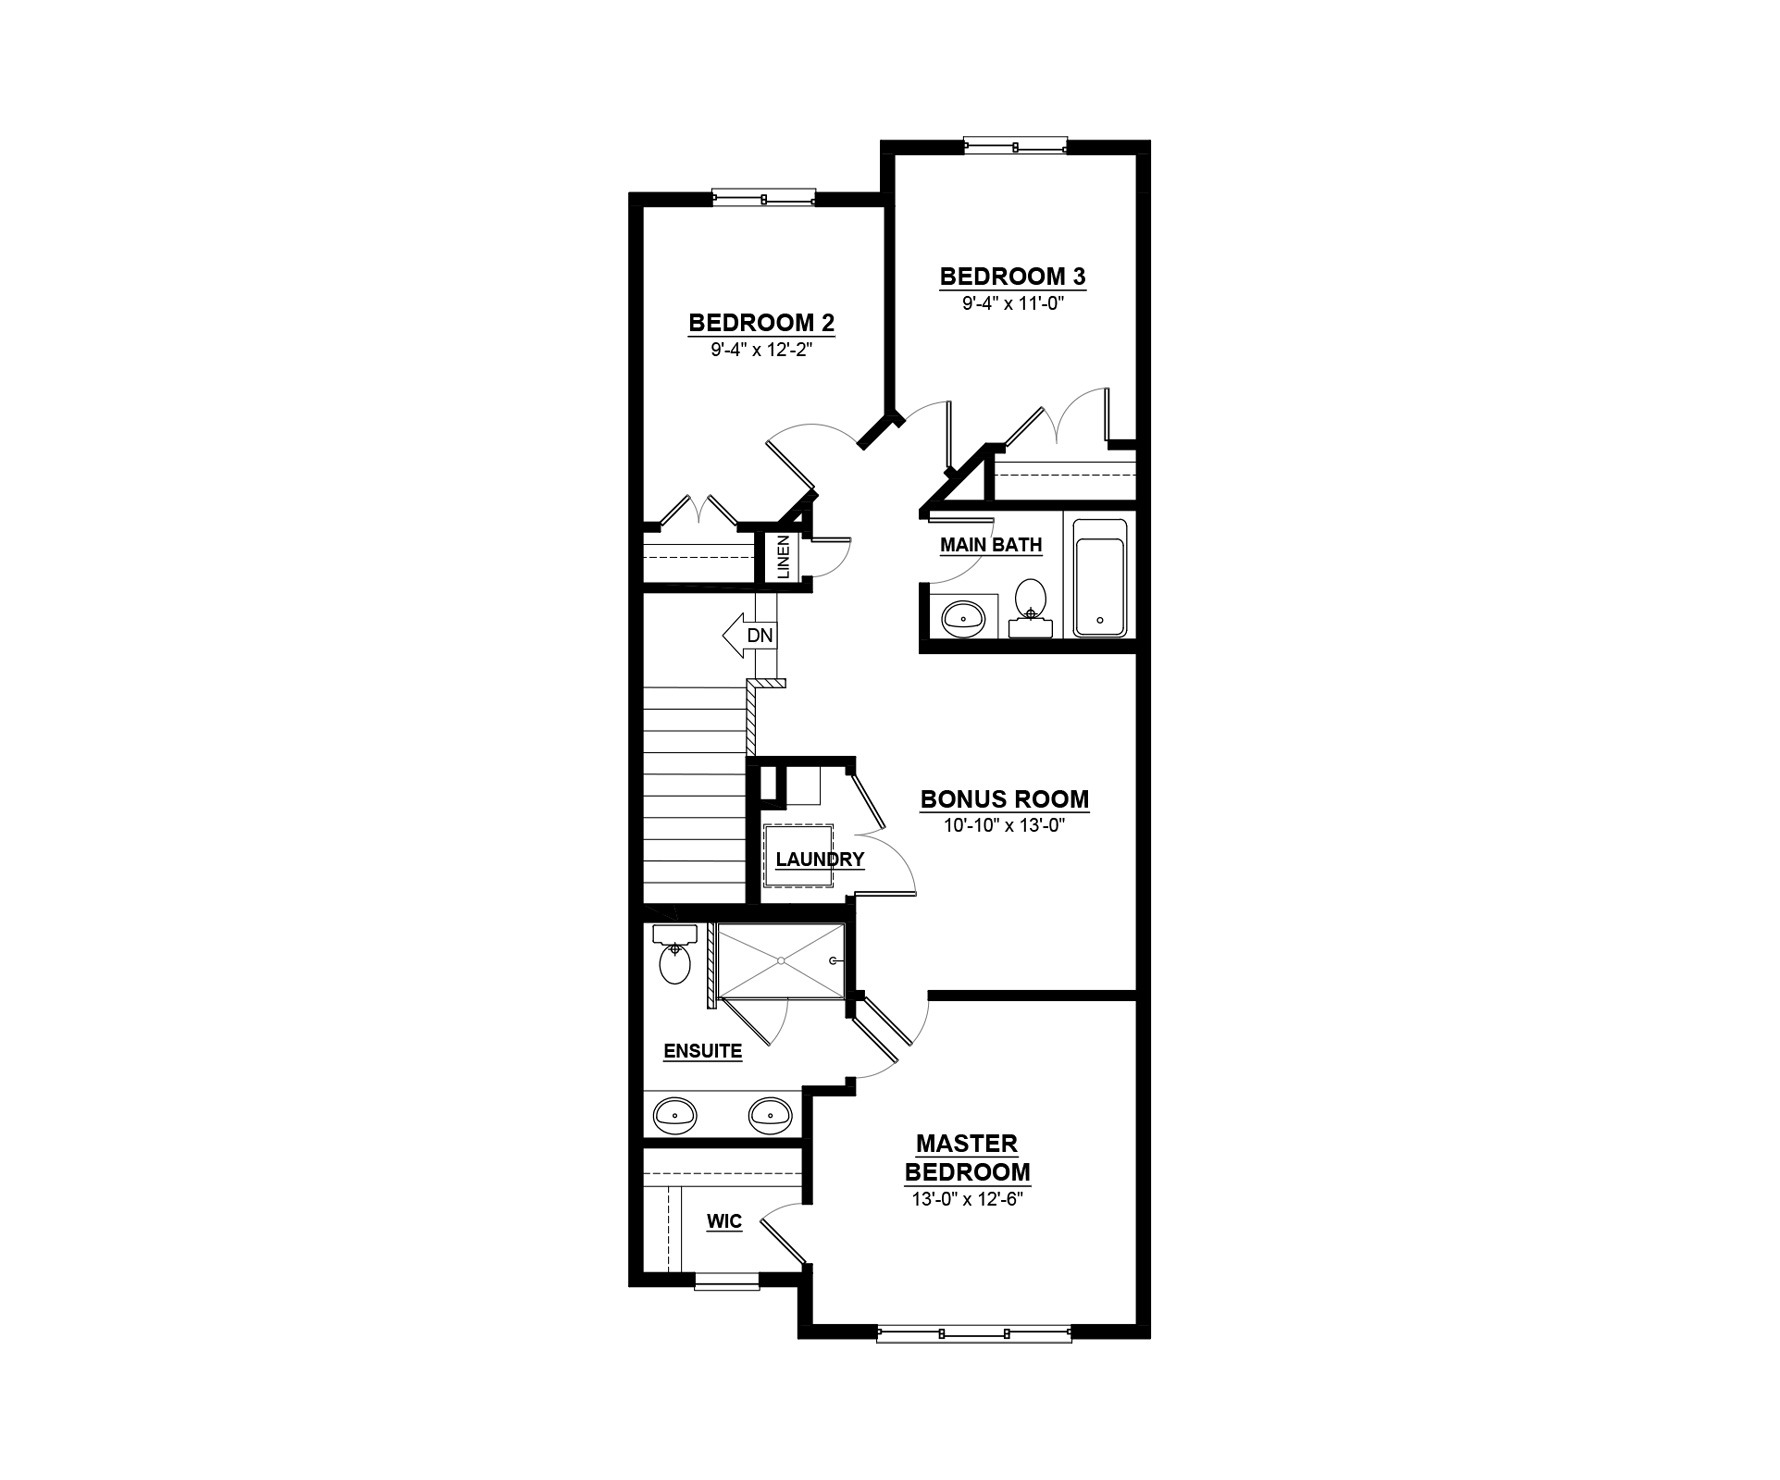 CARRERA-Z Floor Plan of Saxony Glen by Daytona Homes with undefined beds